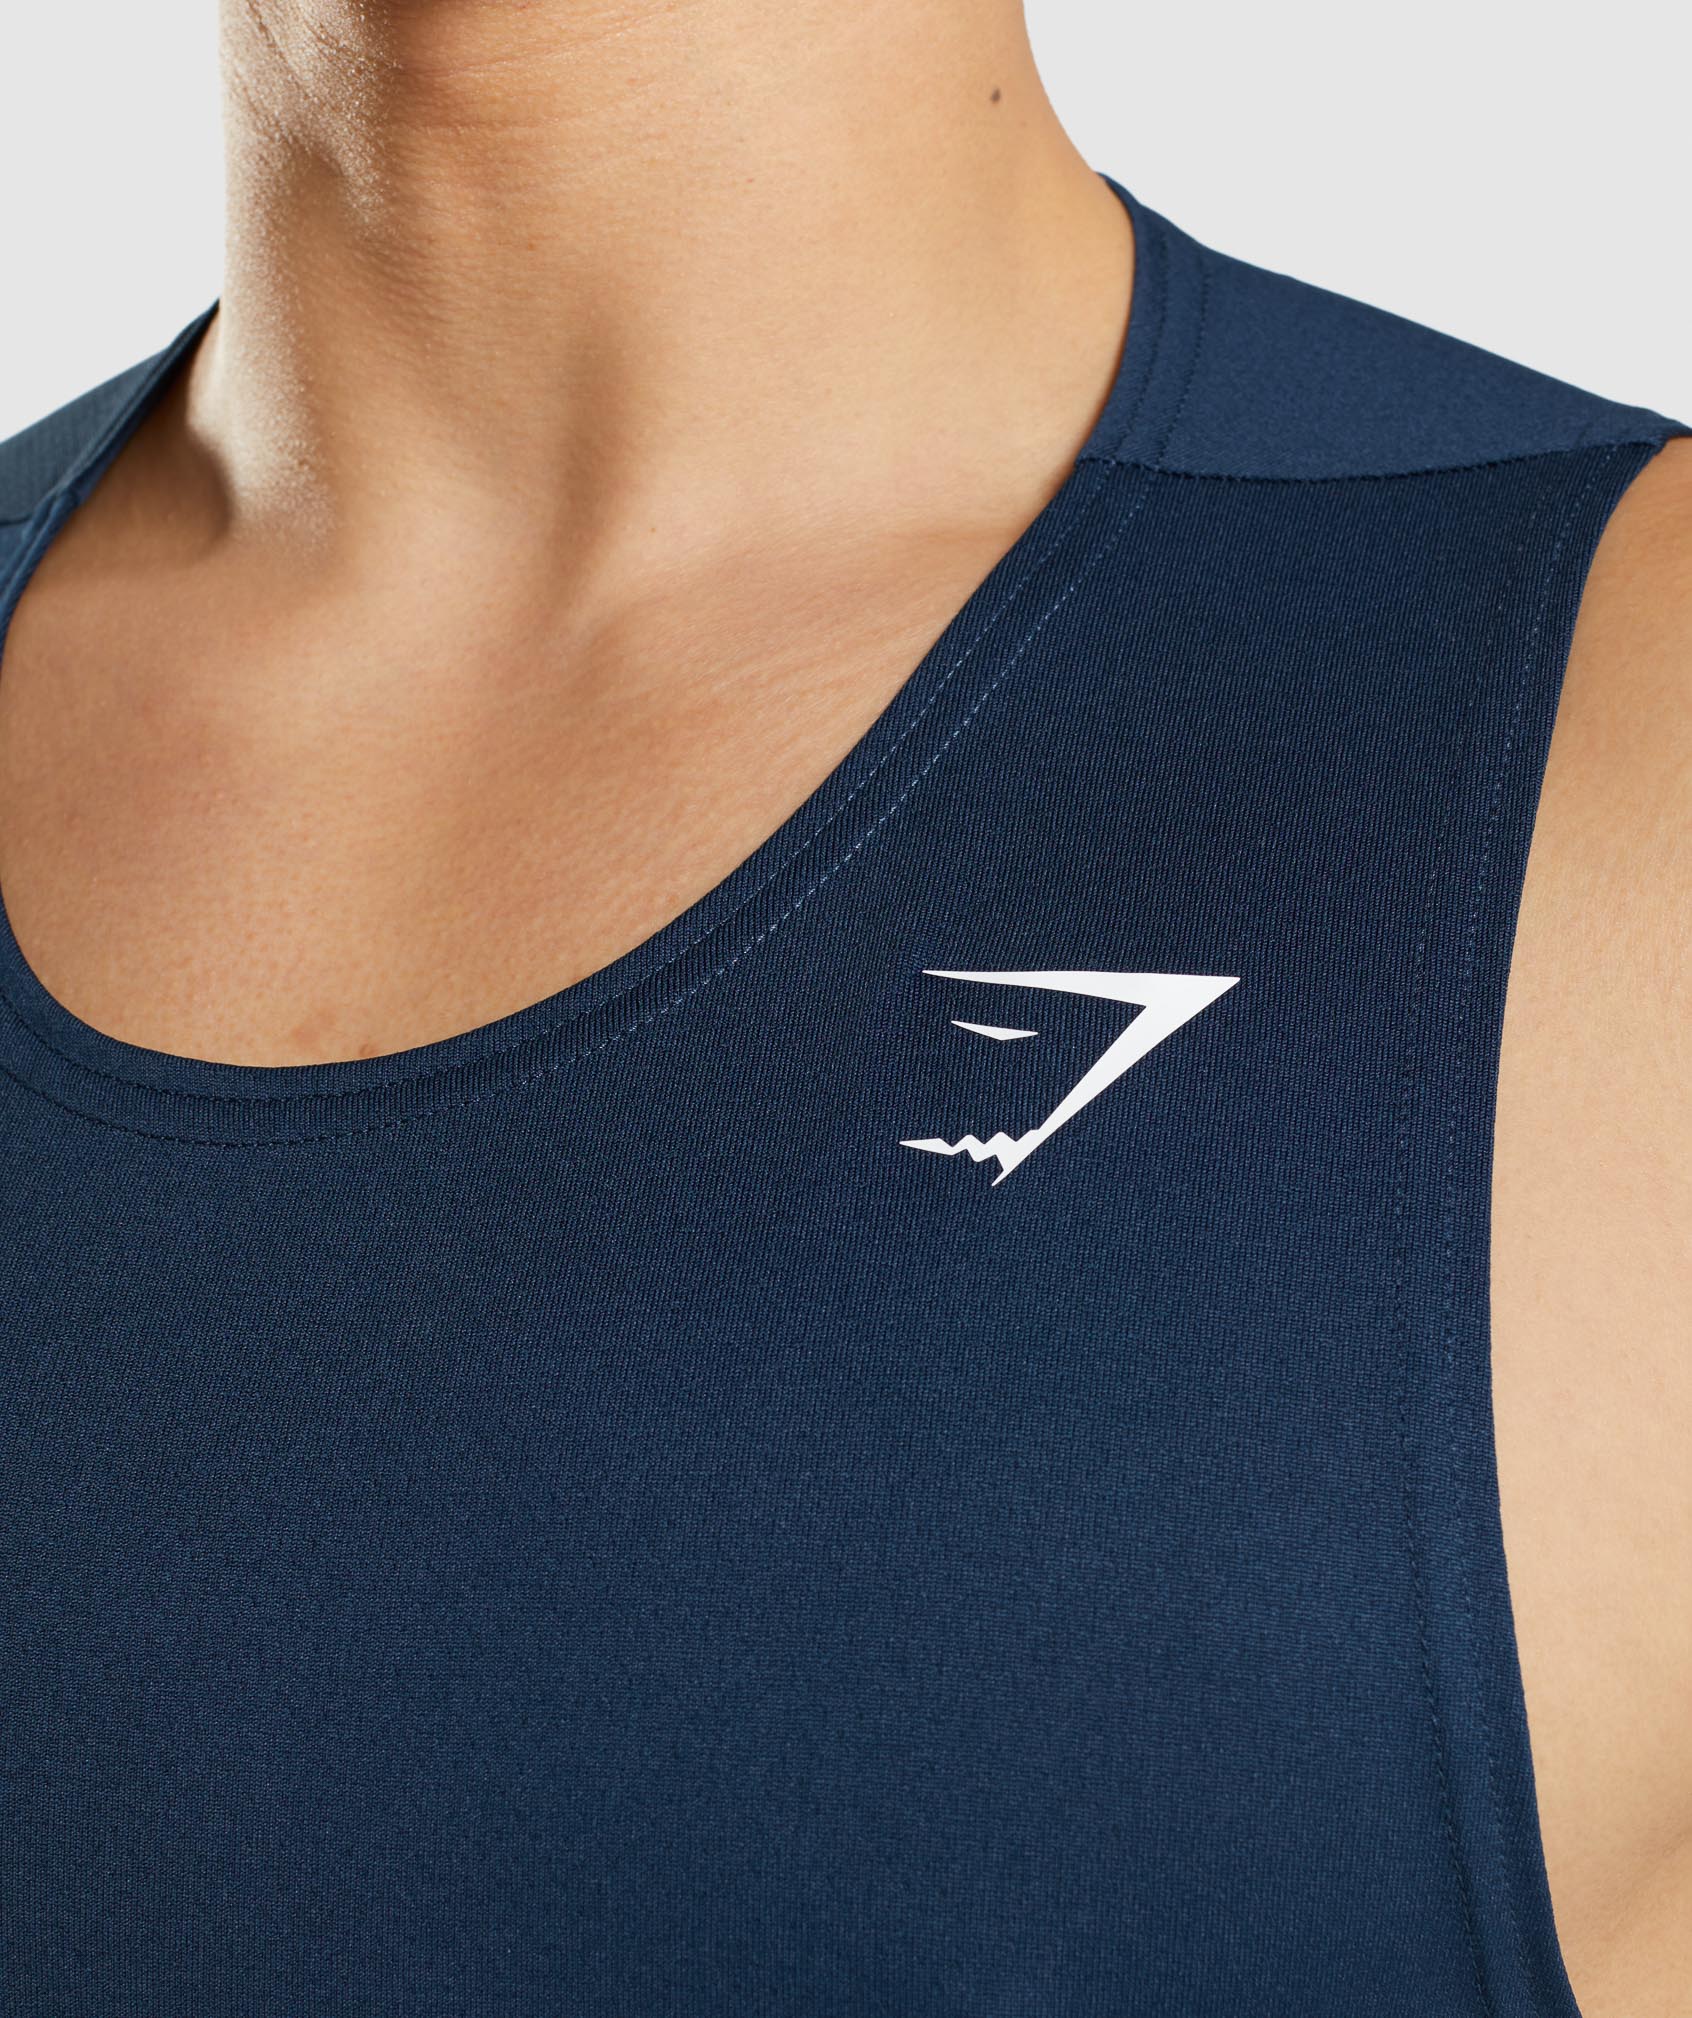 Arrival Tank in Navy - view 6